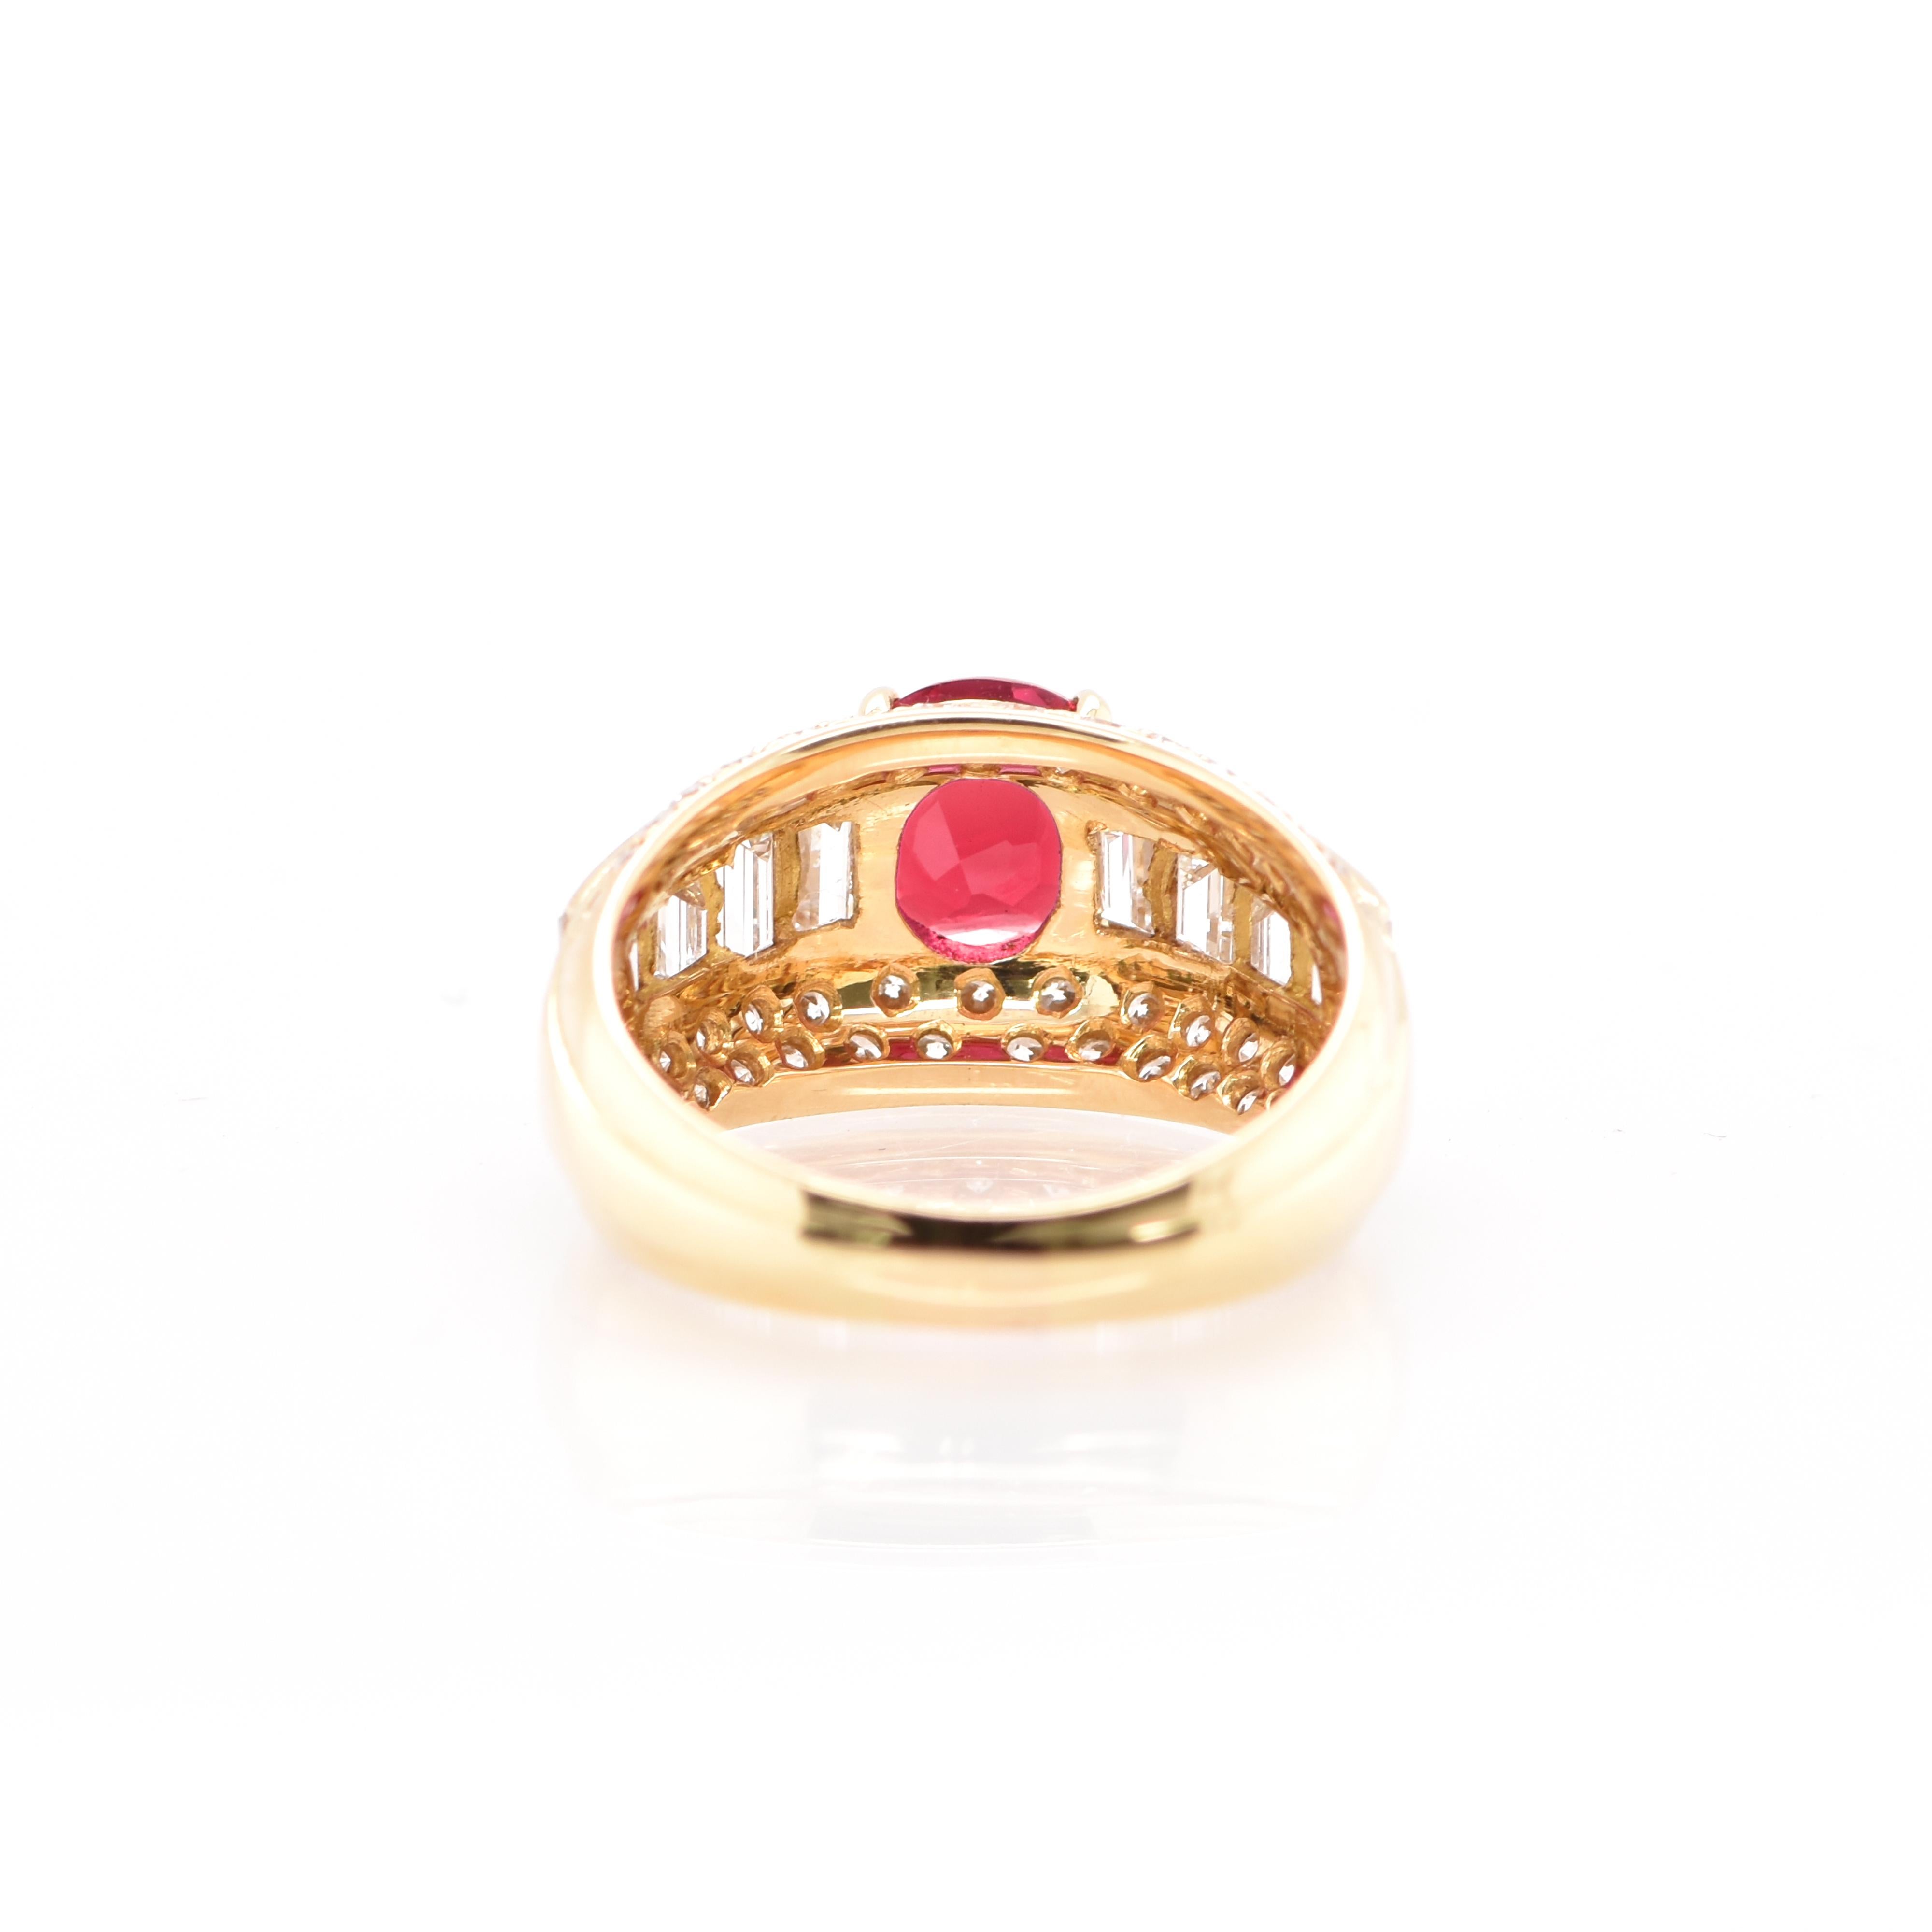 A beautiful Band Ring featuring a 1.48 Carat Ruby and 2.01 Carats of Diamond Accents set in 18K Yellow Gold. The center Ruby exhibits very good color and luster. Rubies are referred to as 